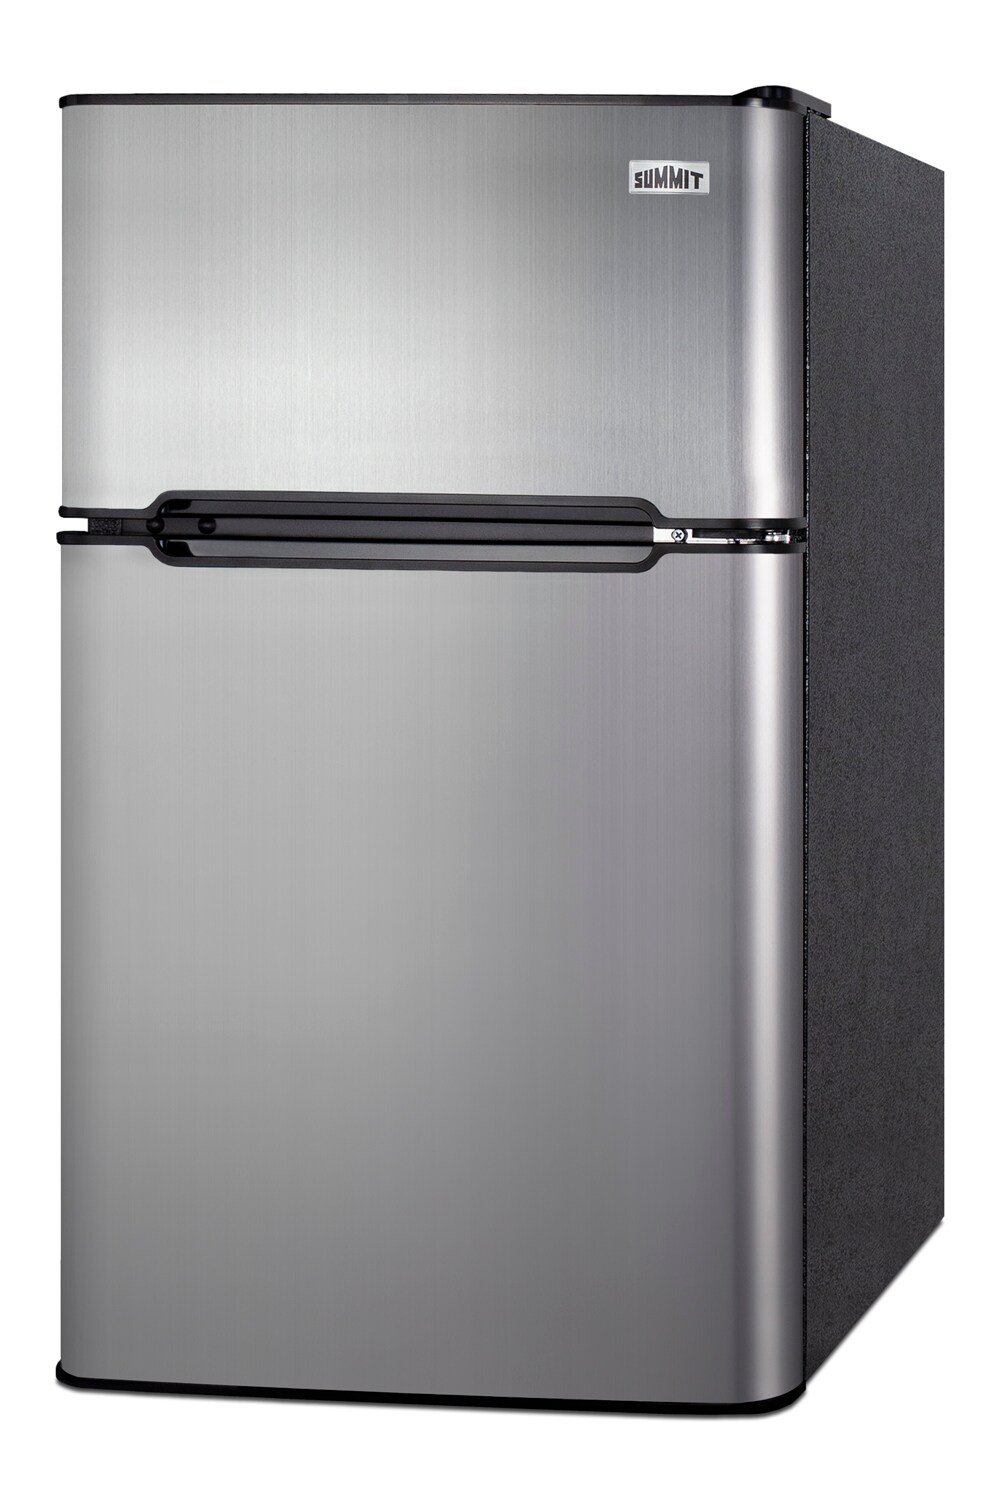 Summit Appliance All-In-One Combo Kitchens 3.2 Cubic Feet cu. ft. Mini  Fridge with Freezer Kitchenette & Reviews